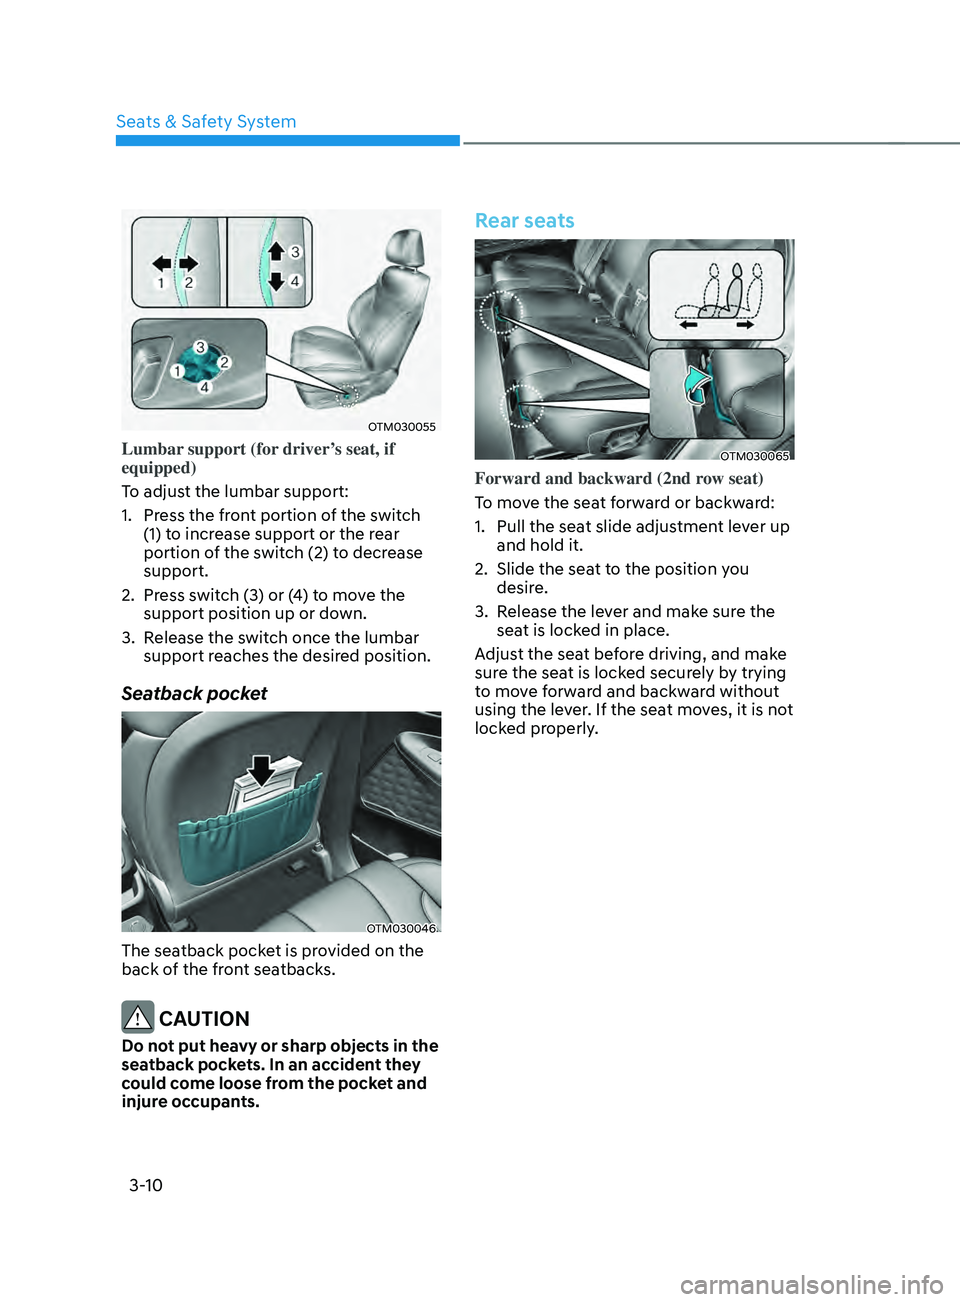 HYUNDAI SANTA FE 2021  Owners Manual Seats & Safety System
3-10
OTM030055
Lumbar support (for driver’s seat, if 
equipped)
To adjust the lumbar support:
1.
 Press the fr
ont portion of the switch 
(1) to increase support or the rear 
p